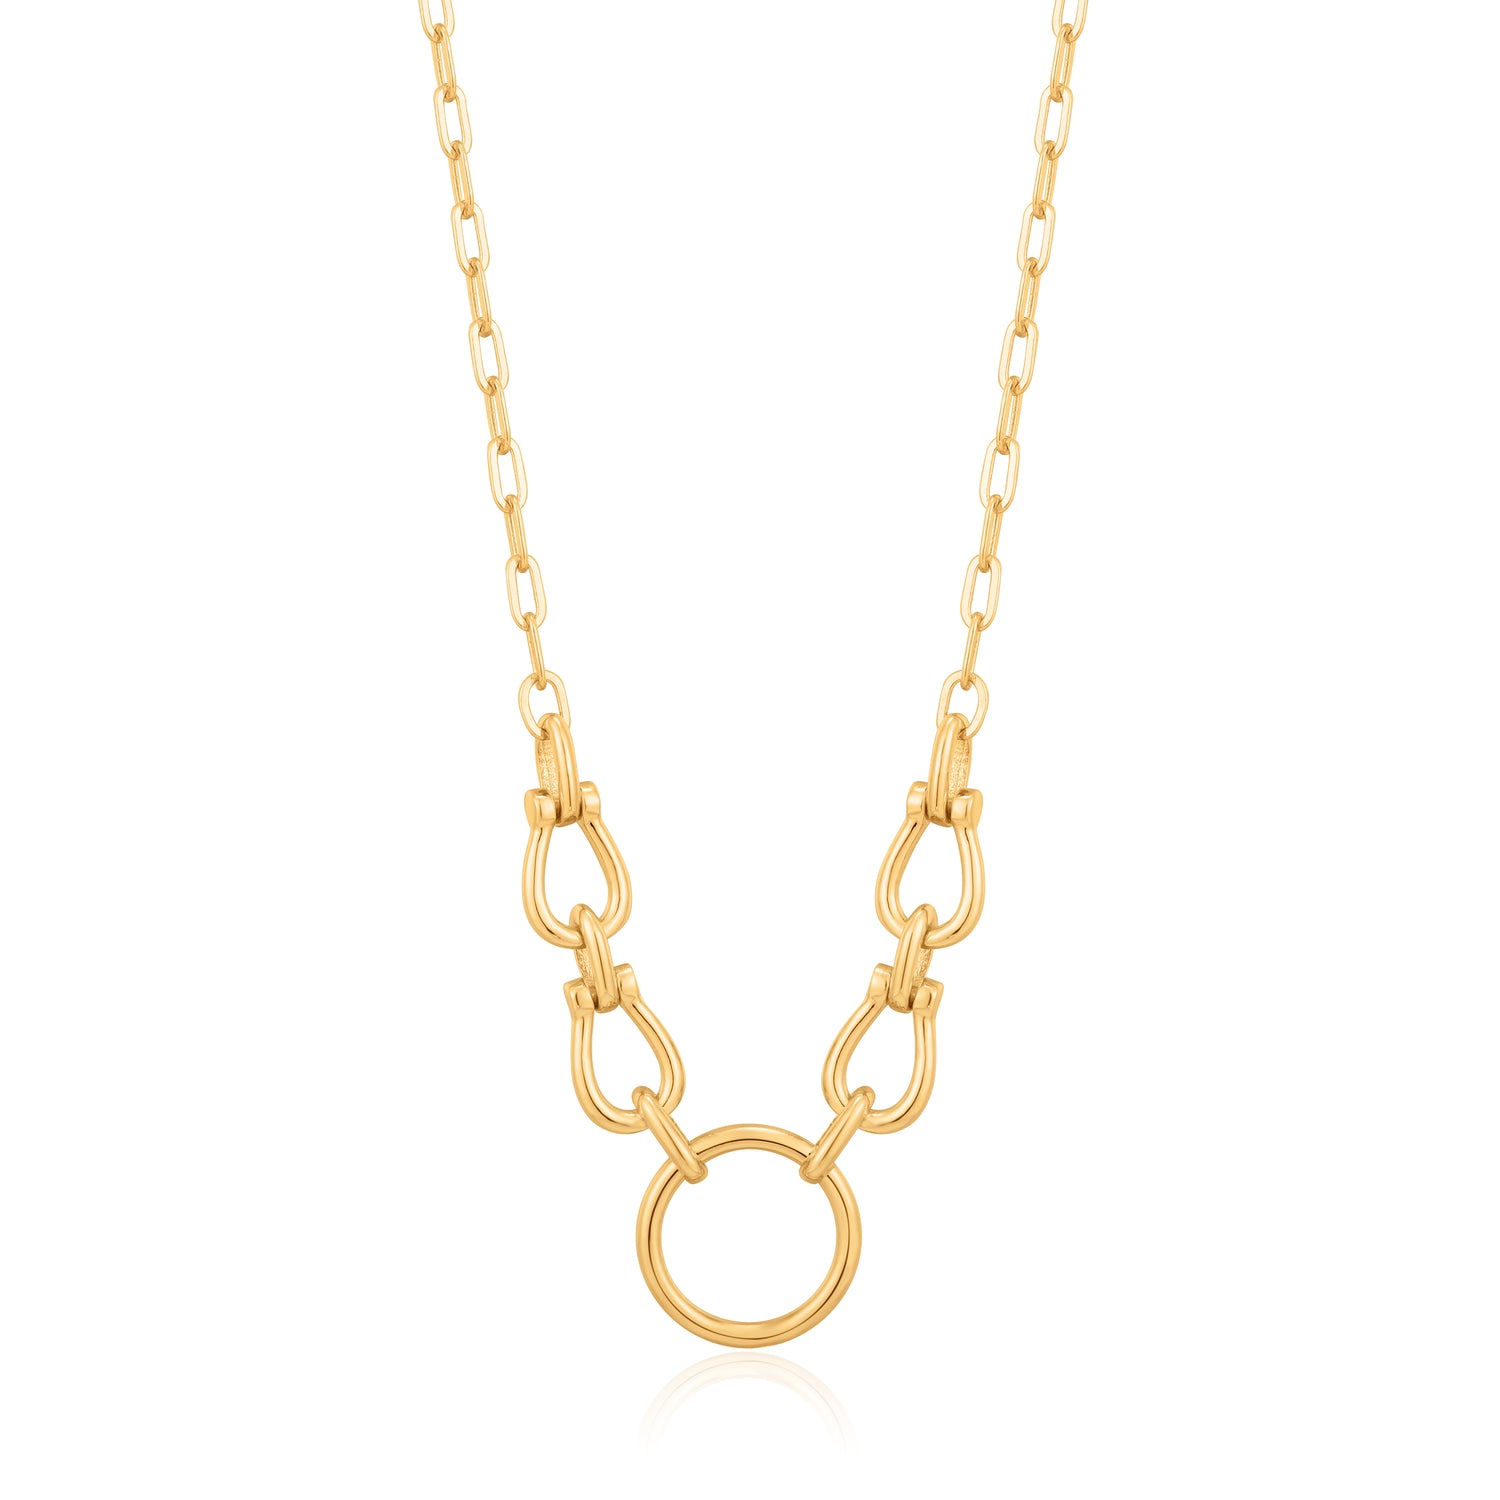 ANIA HAIE ANIA HAIE - Gold Horseshoe Link Necklace available at The Good Life Boutique